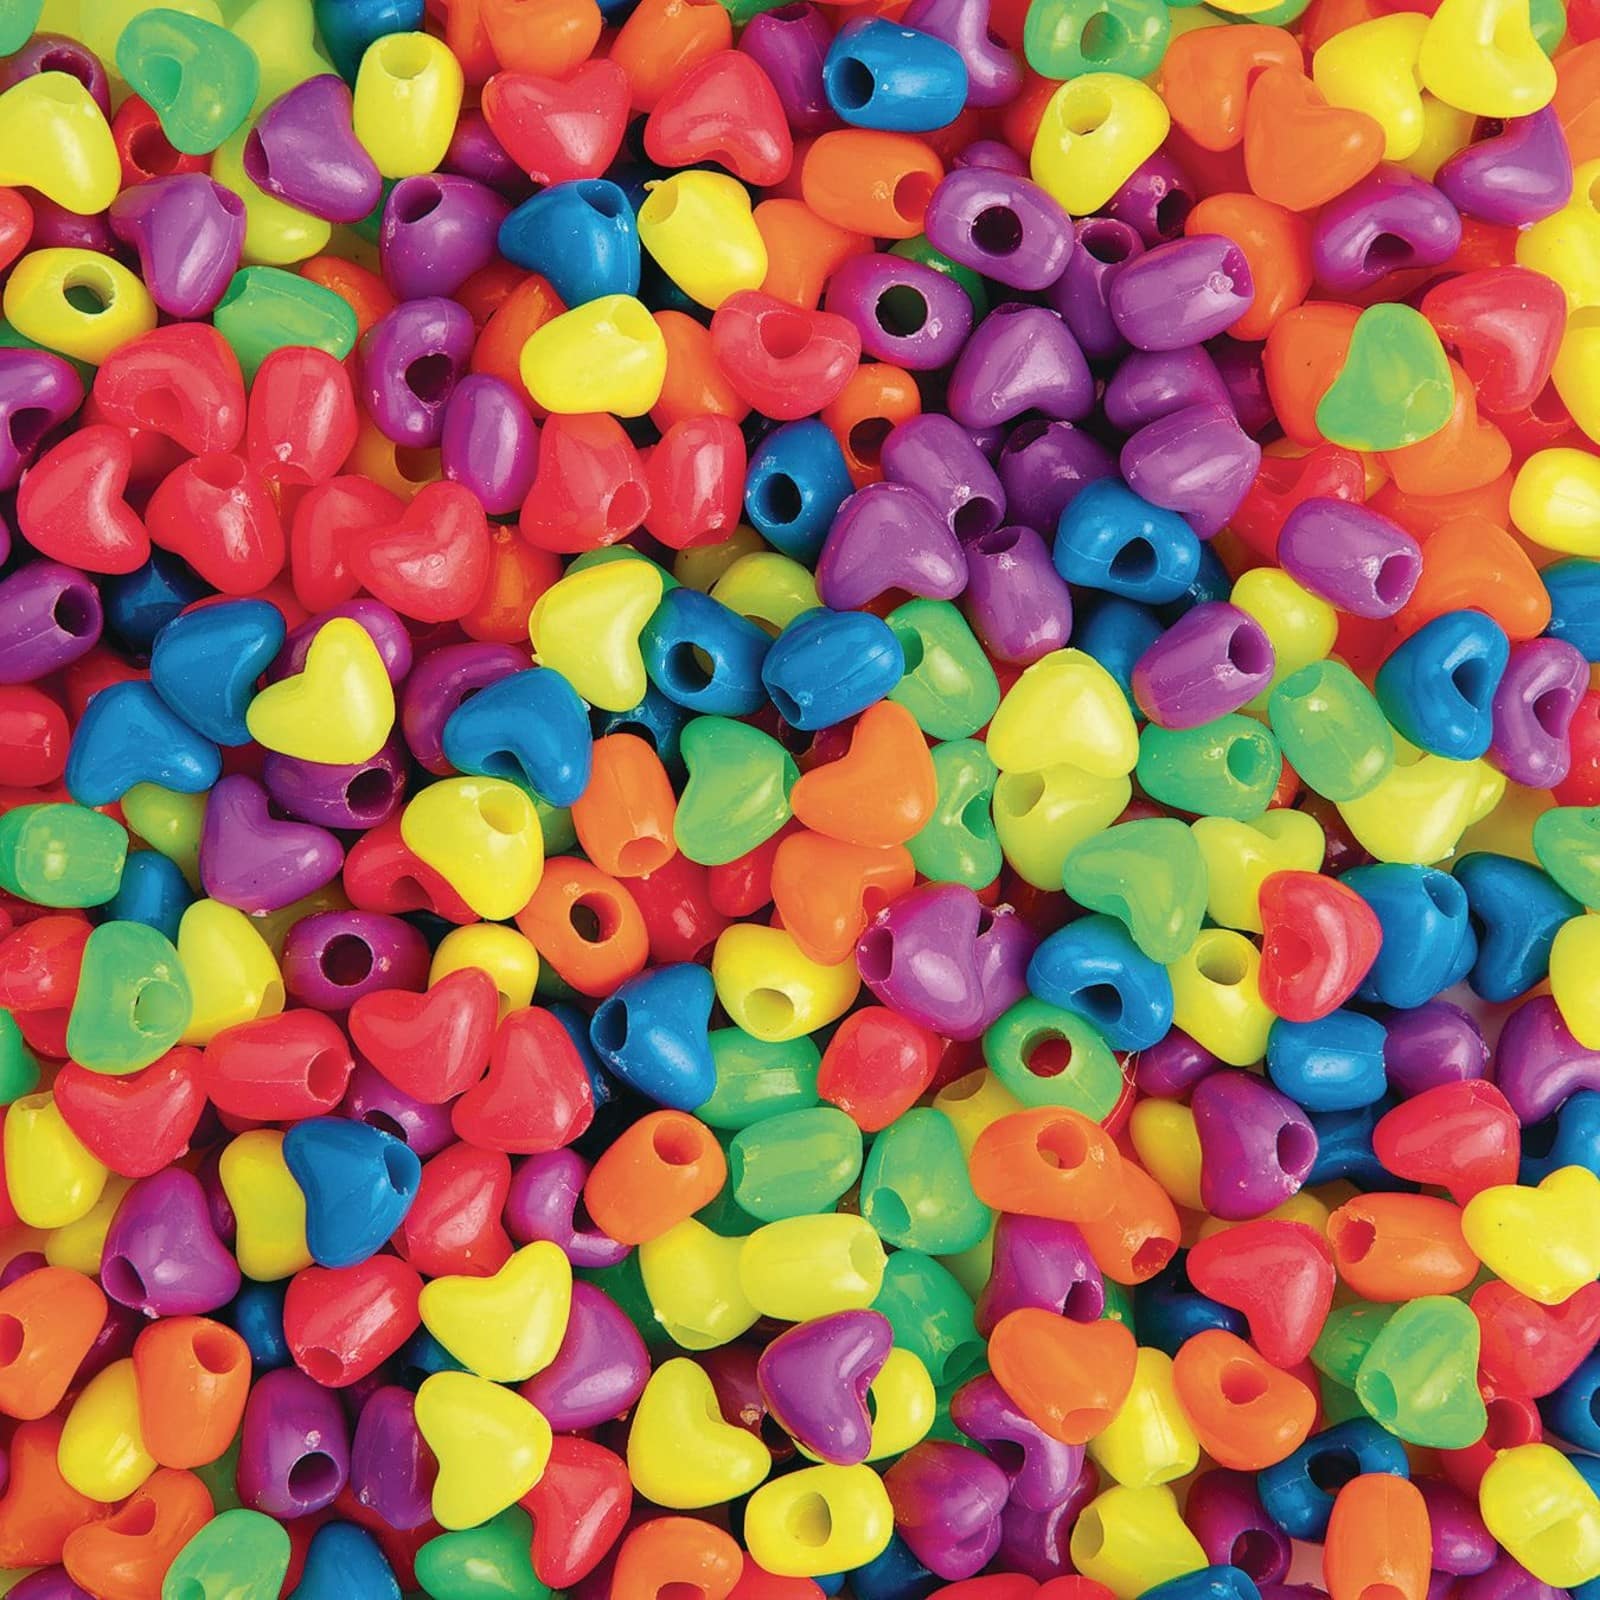 POP! Possibilities 9mm Heart Pony Beads in Value Pack by POP!